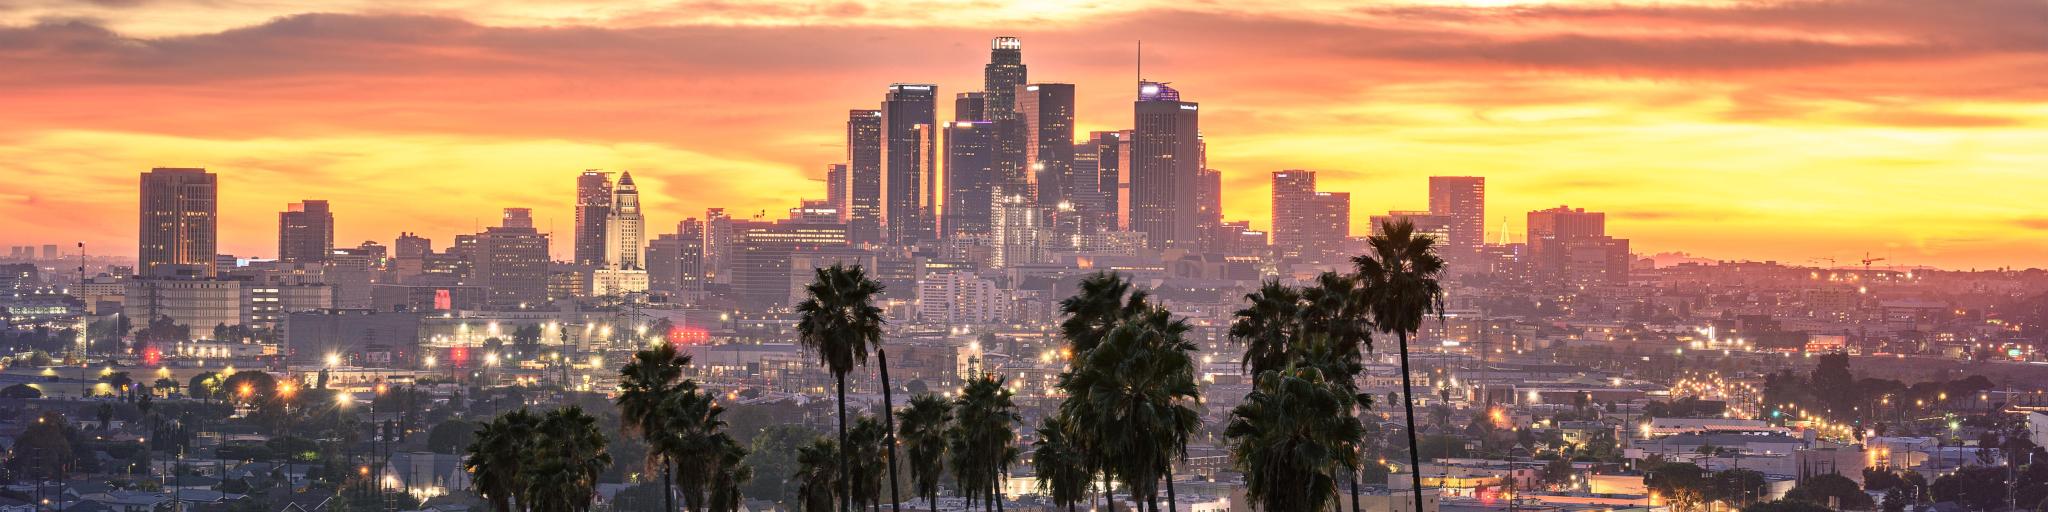 Los Angeles, California, USA with the downtown skyline at sunset and palm trees in the foreground. 